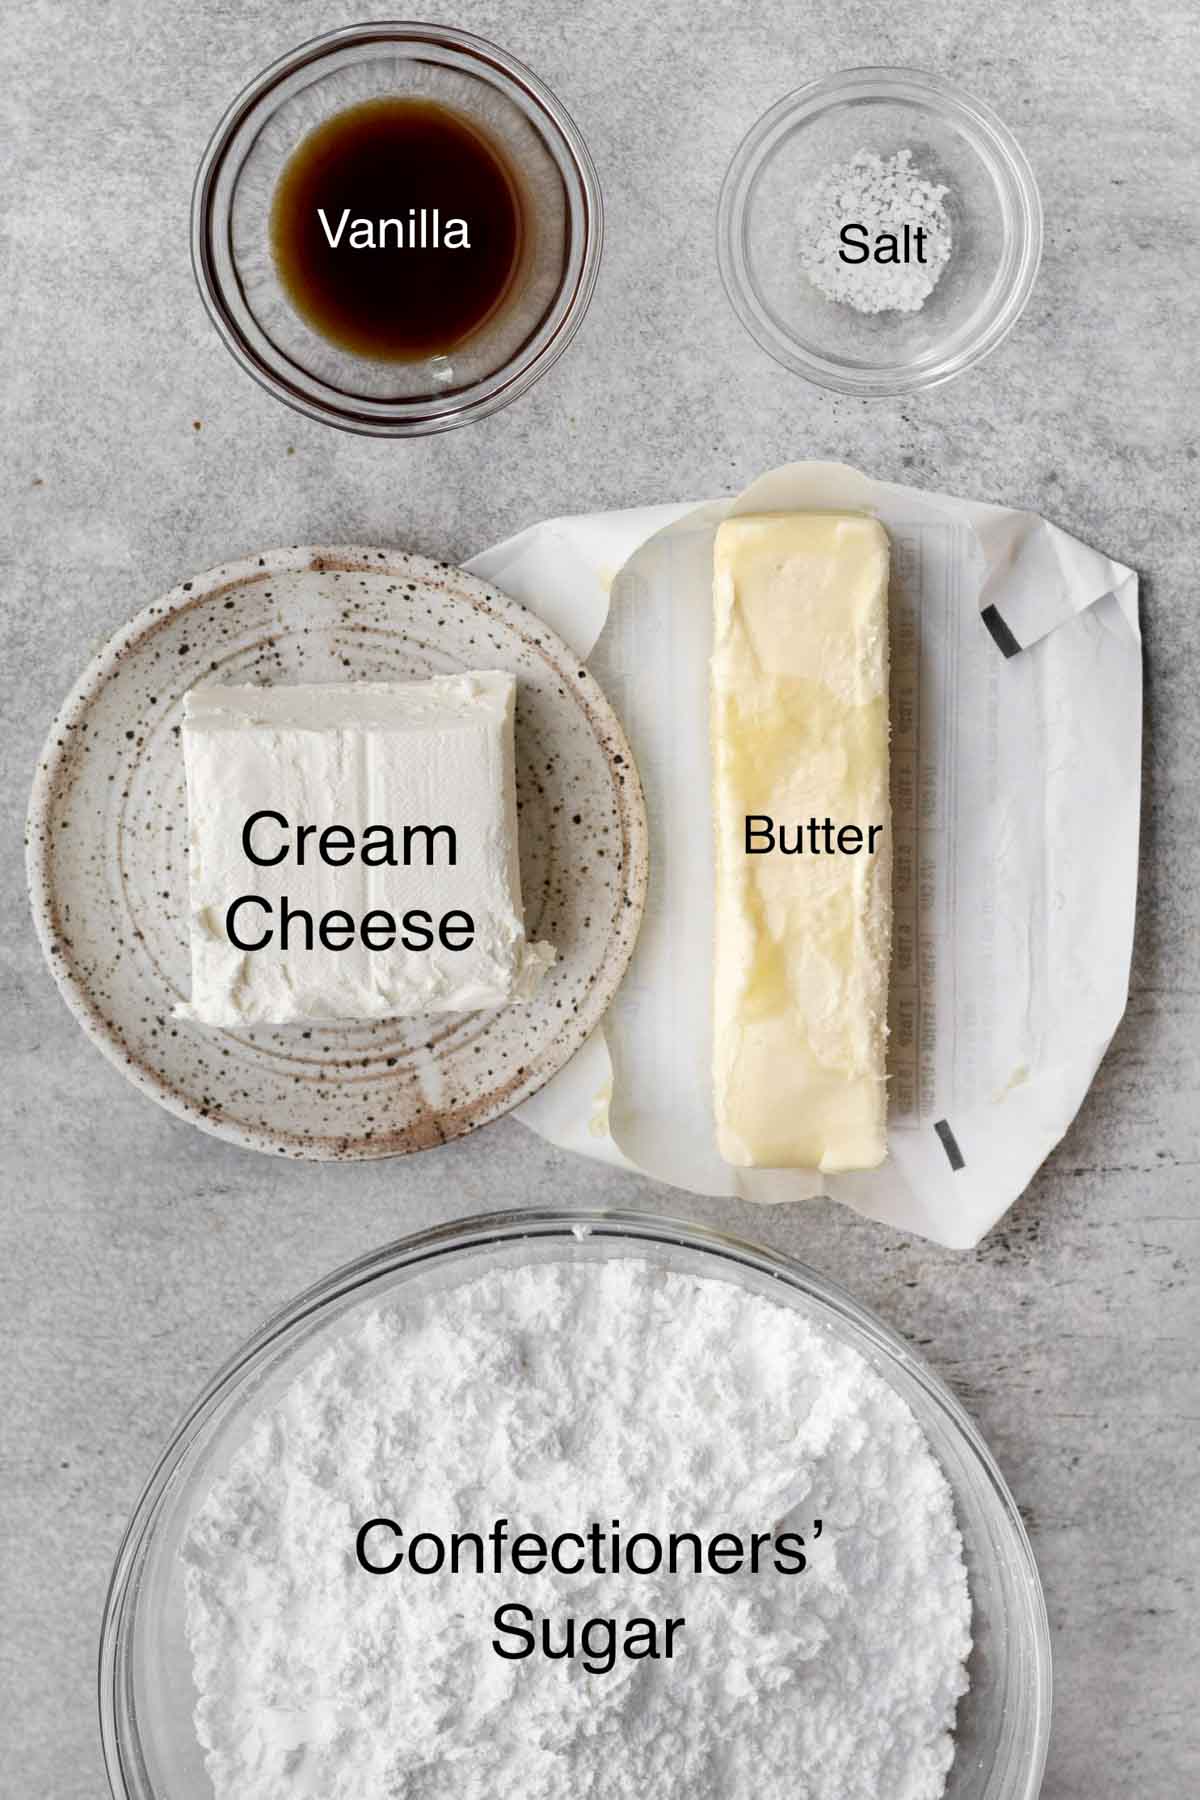 The ingredients for the cream cheese frosting with their text names.